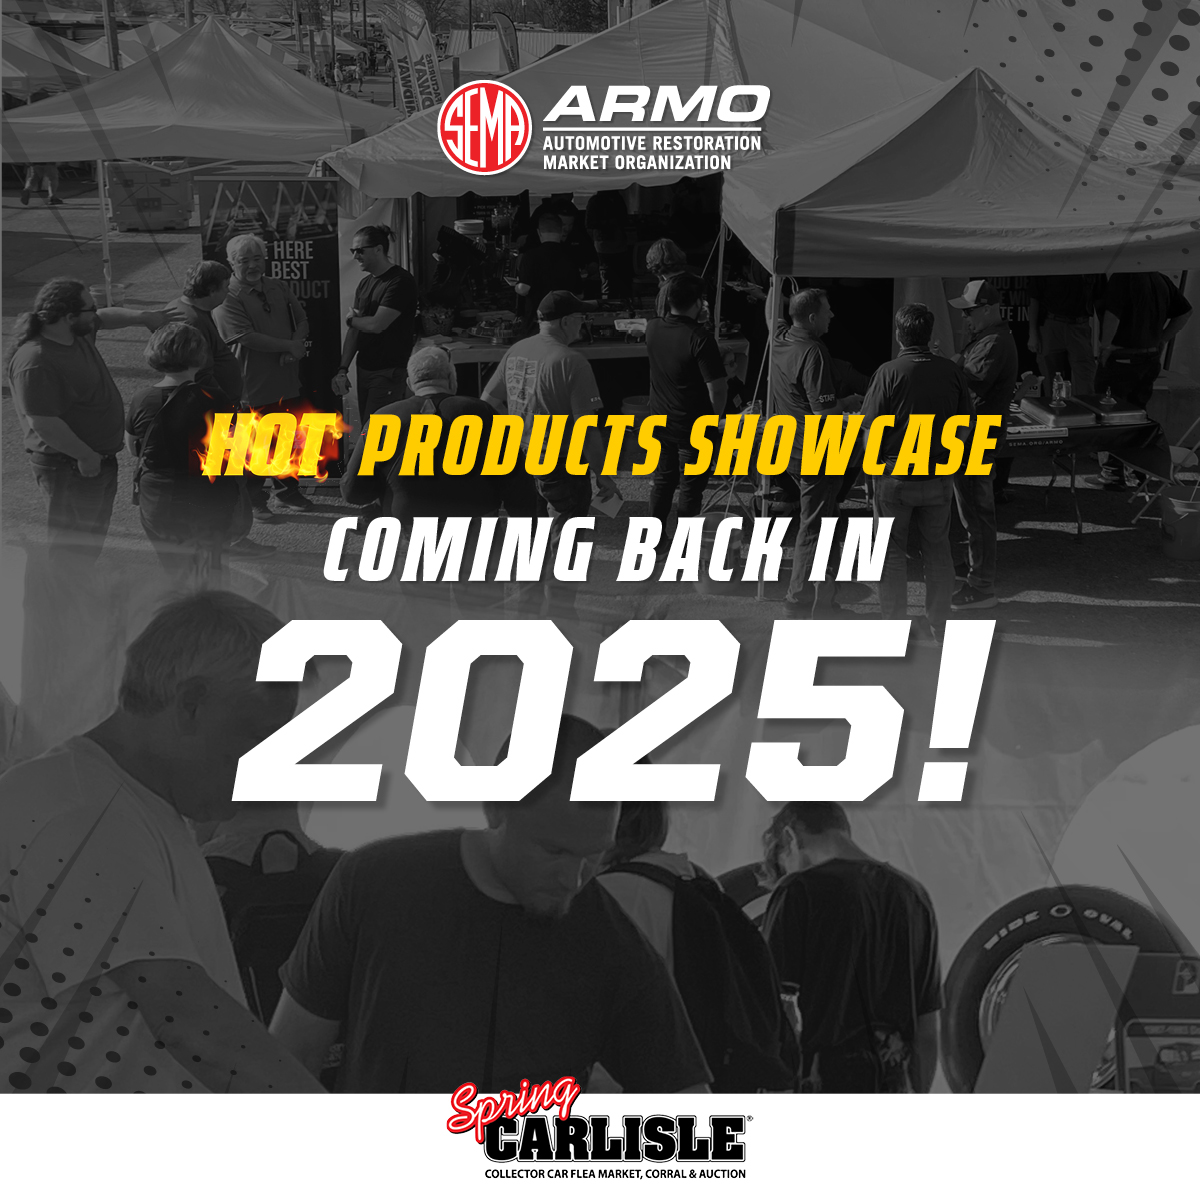 ARNO Hot Product Showcase - Coming back in 2025 - Feature